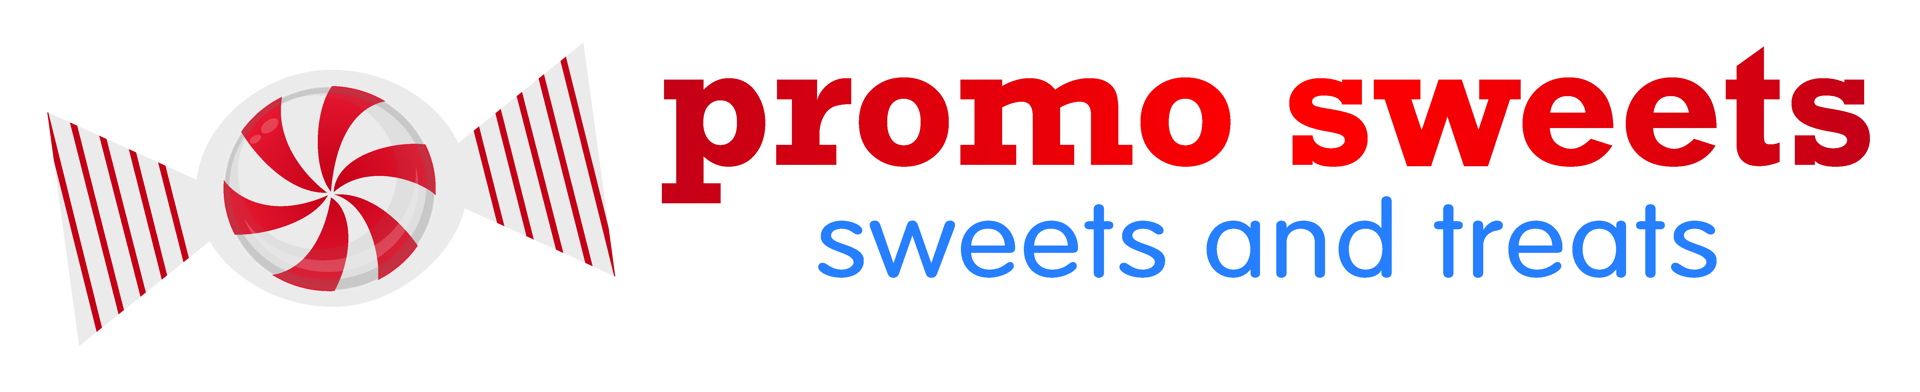 Promo Sweets